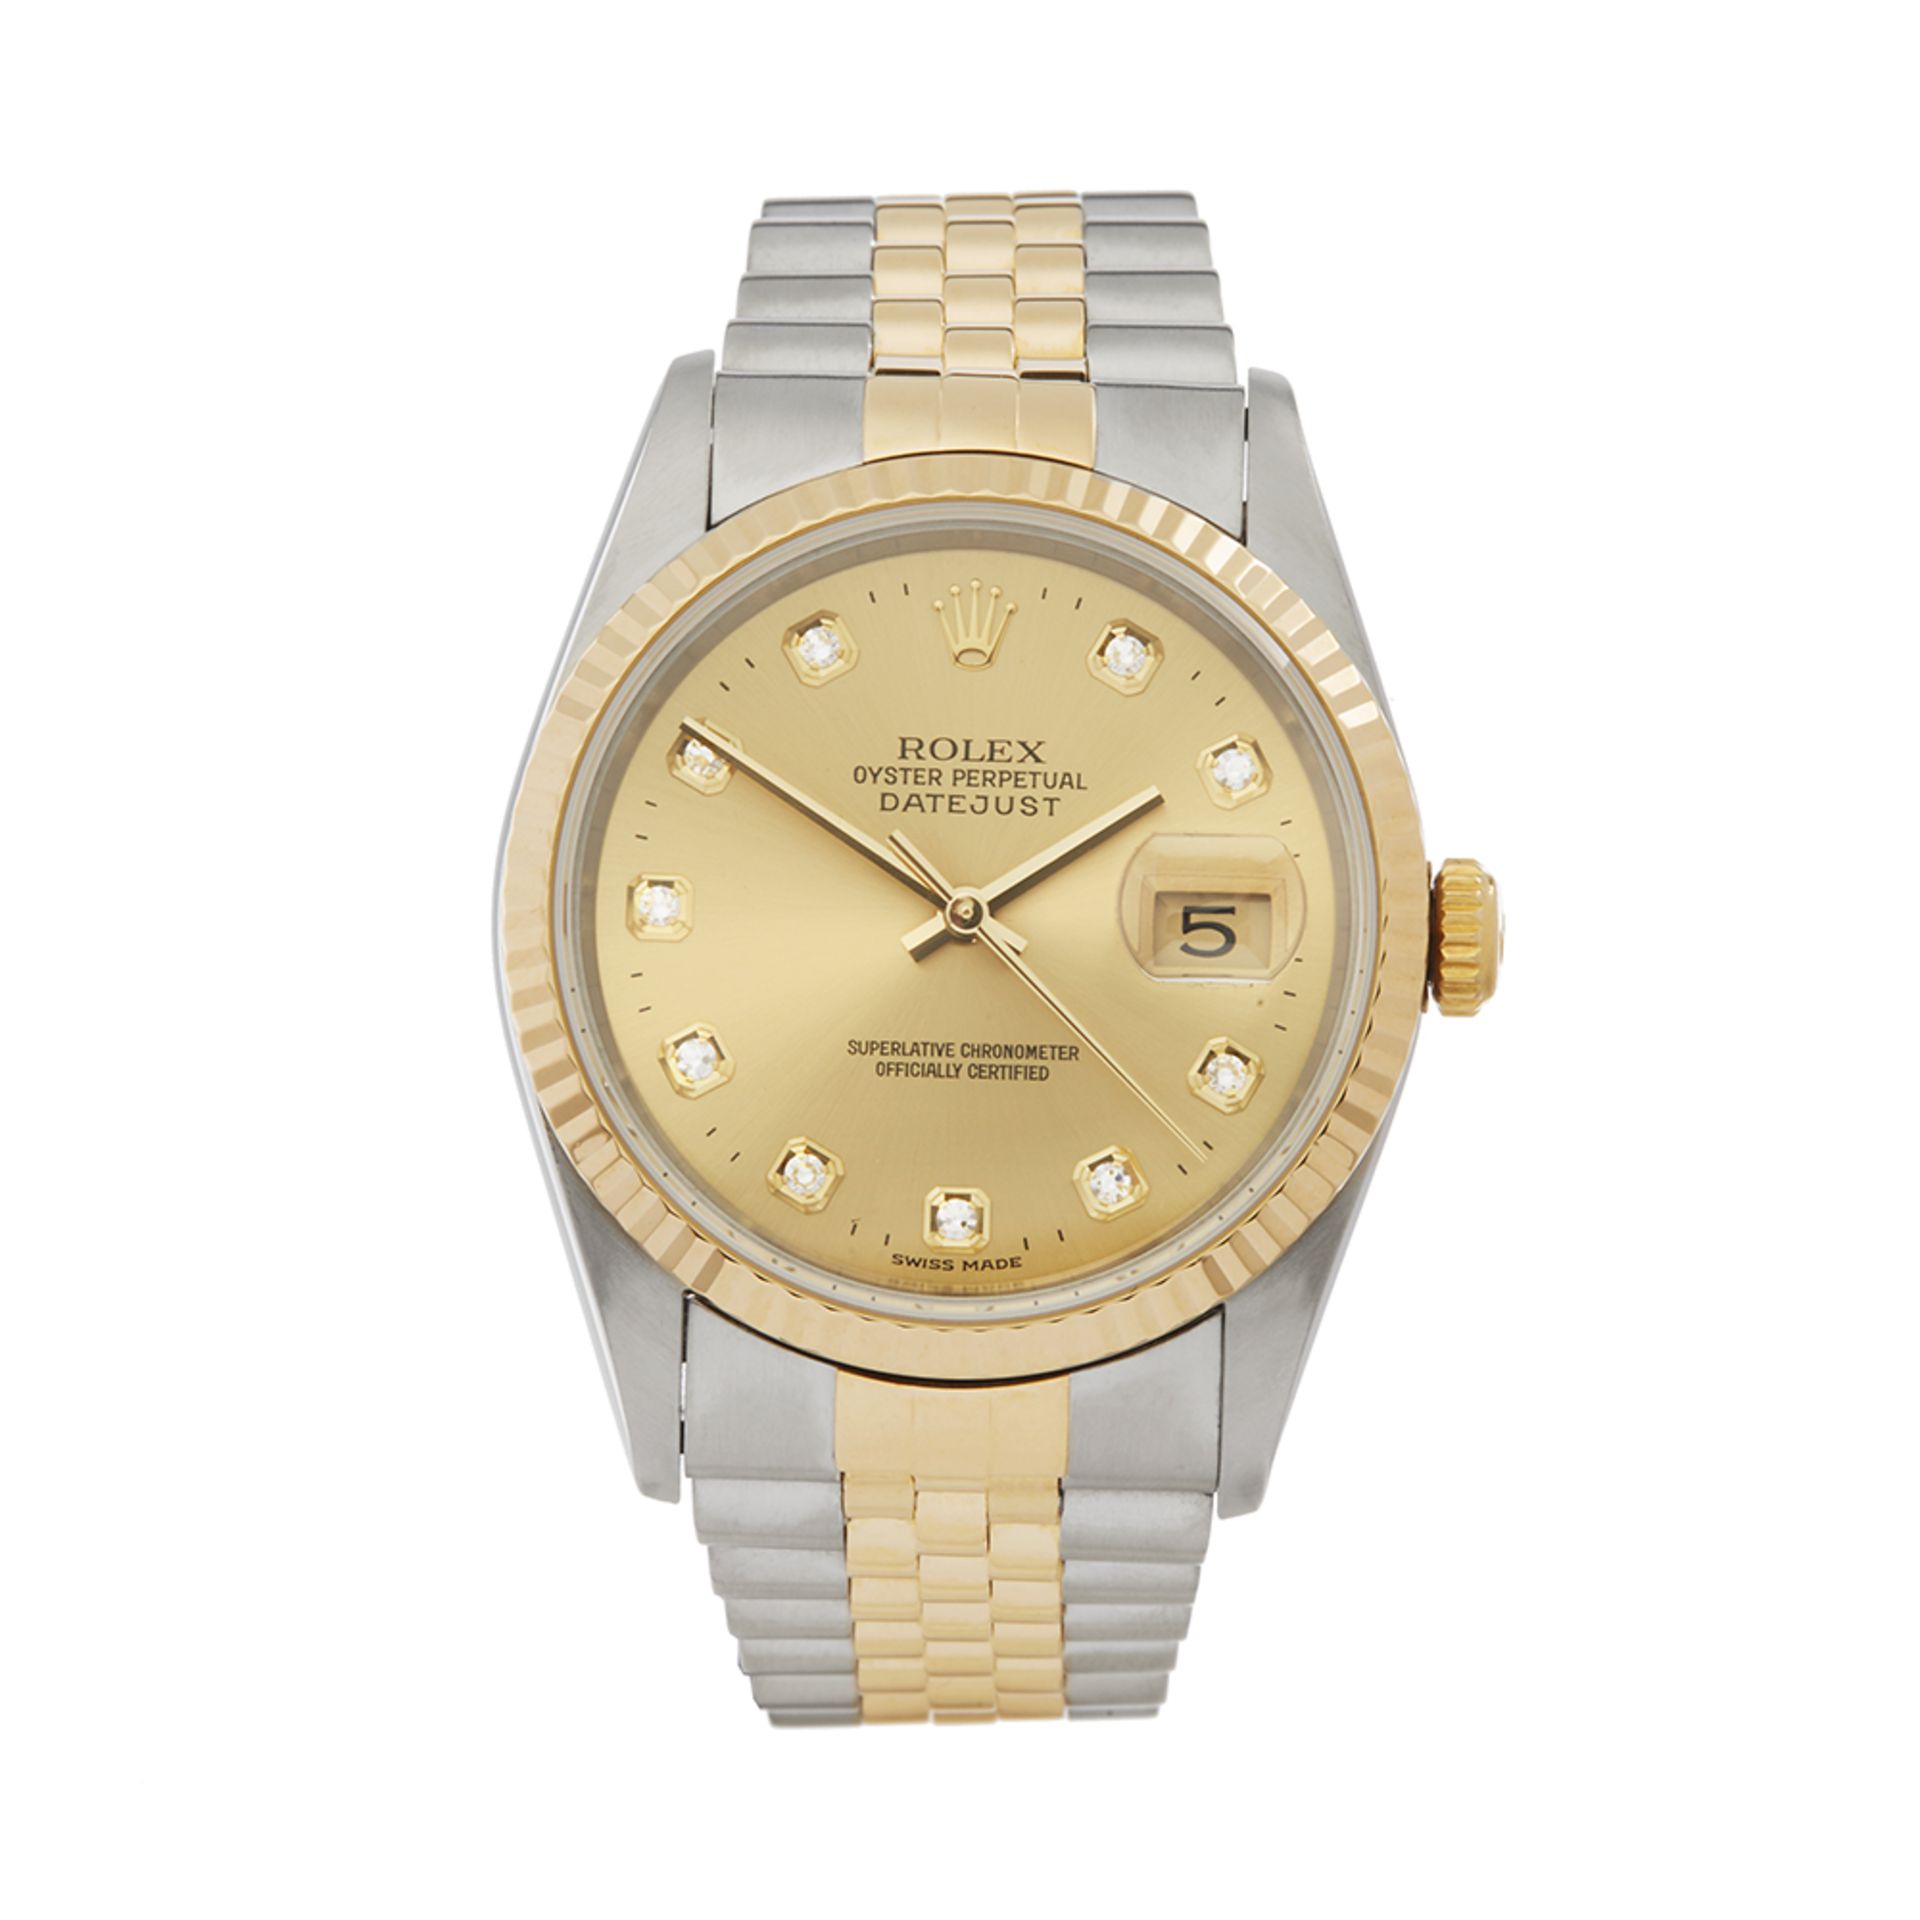 Rolex Datejust 36 Stainless Steel & 18K Yellow Gold - 16233 - Image 2 of 7